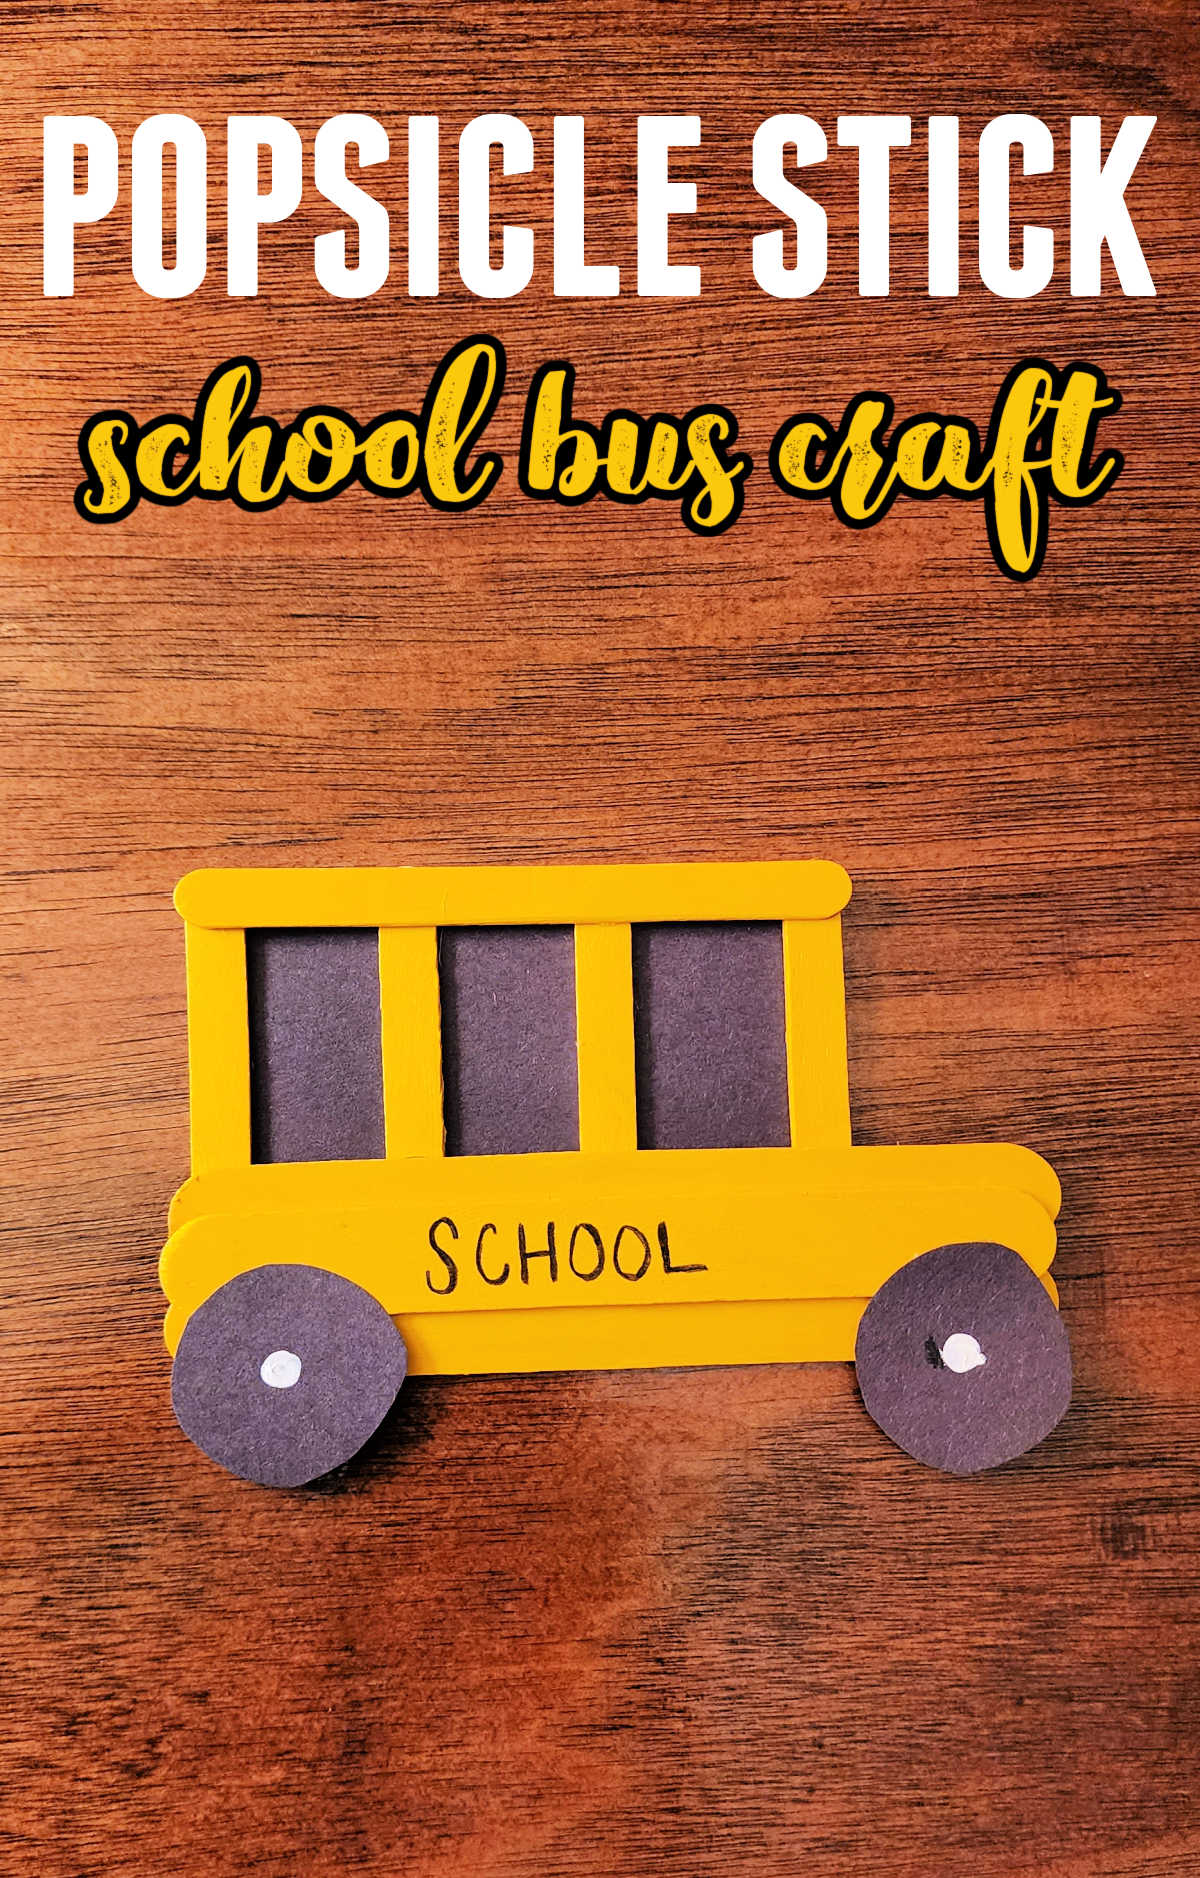 Painted Popsicle Stick School Bus Craft on a wood background.